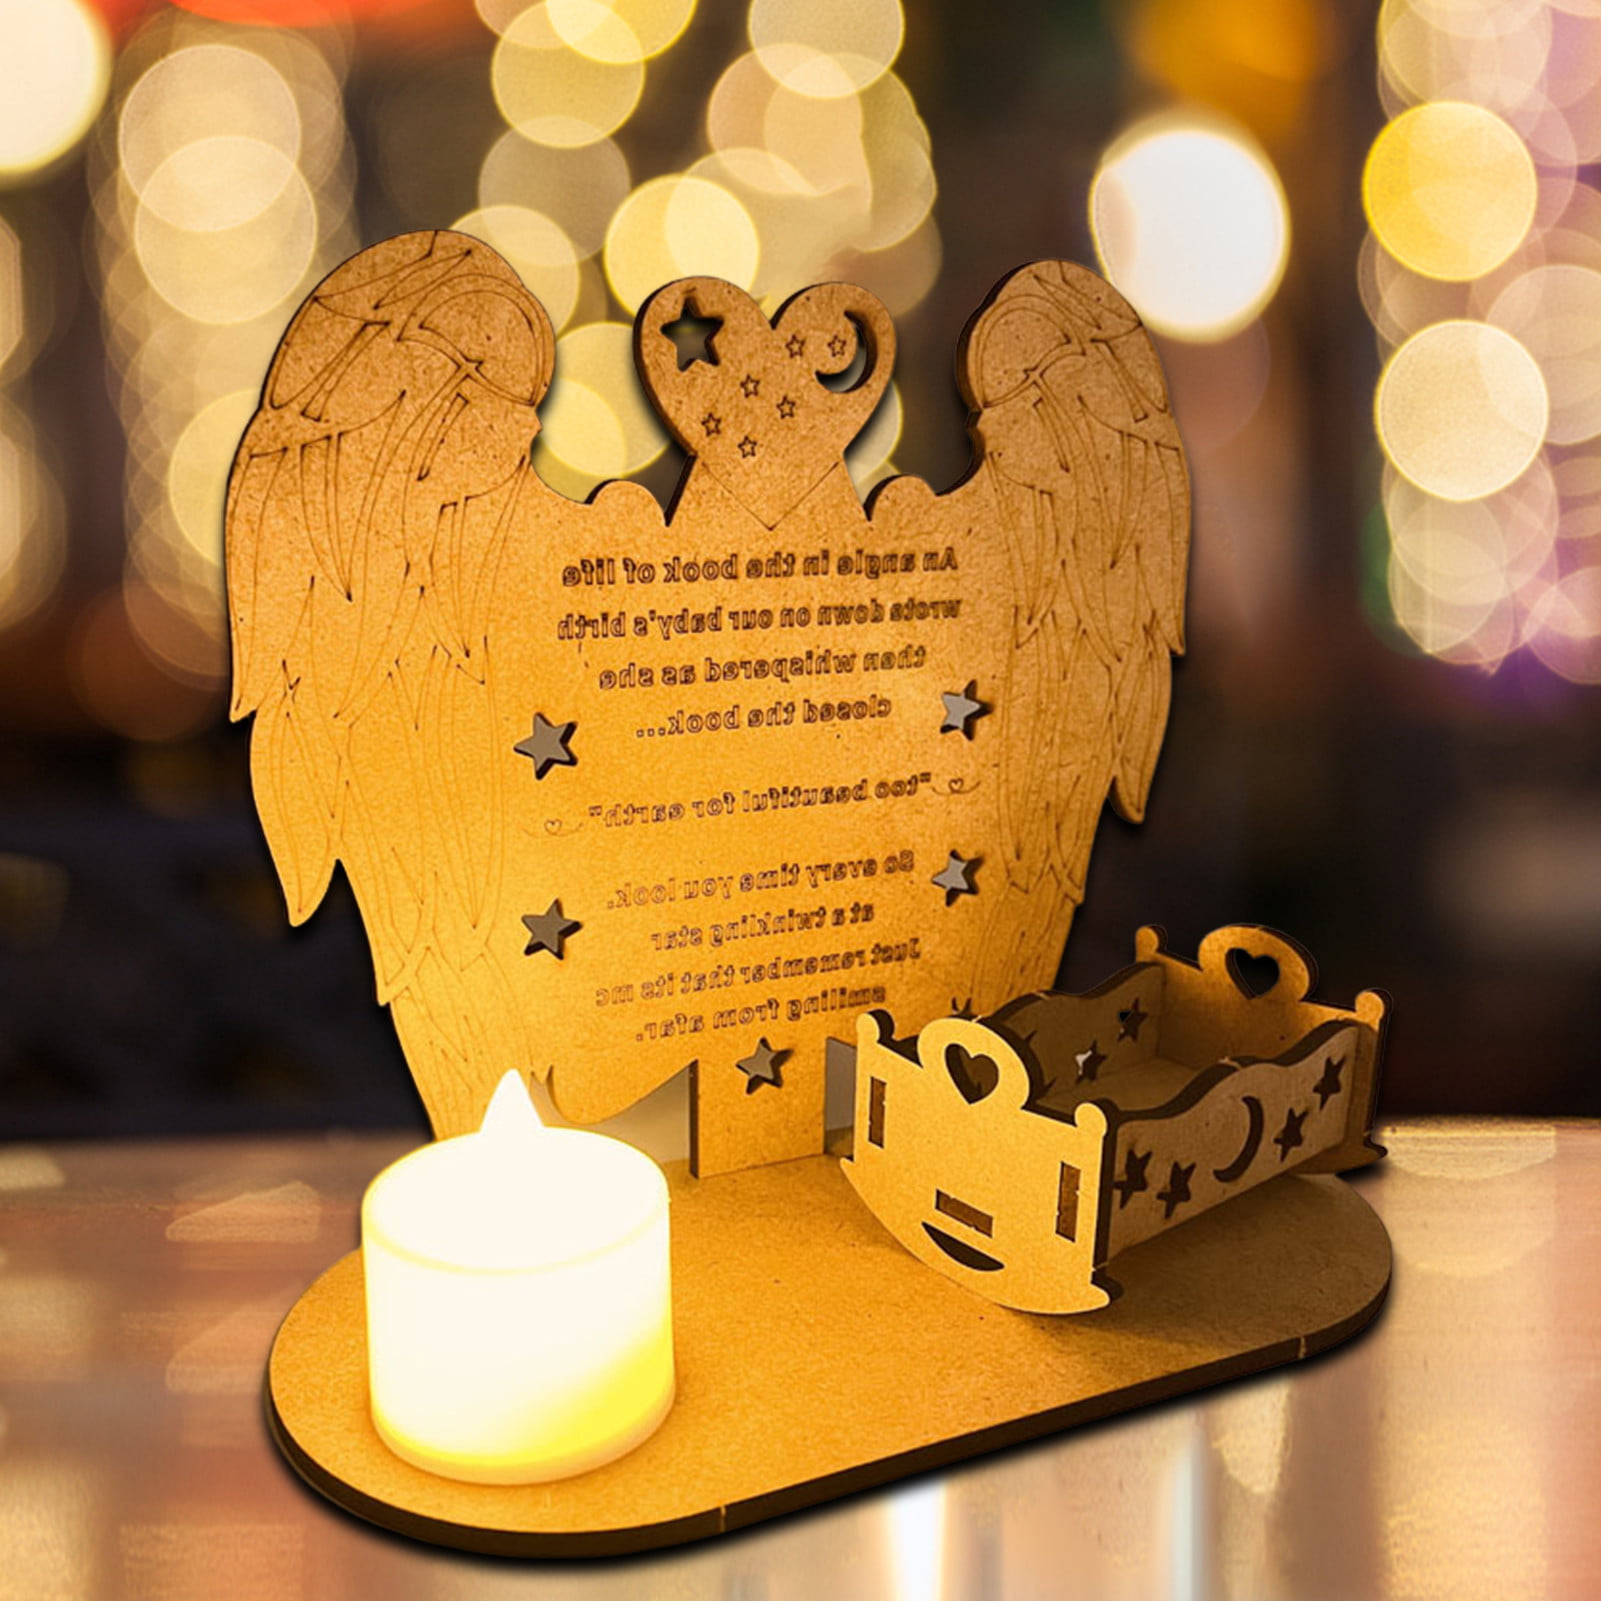 Christmas Remembrance Candle Holder Ornament to Remember Loved Ones Merry Christmas in Heaven Memory Tealight Candlestick Holders with Personalised Chair Christmas Wooden DIY Decoration